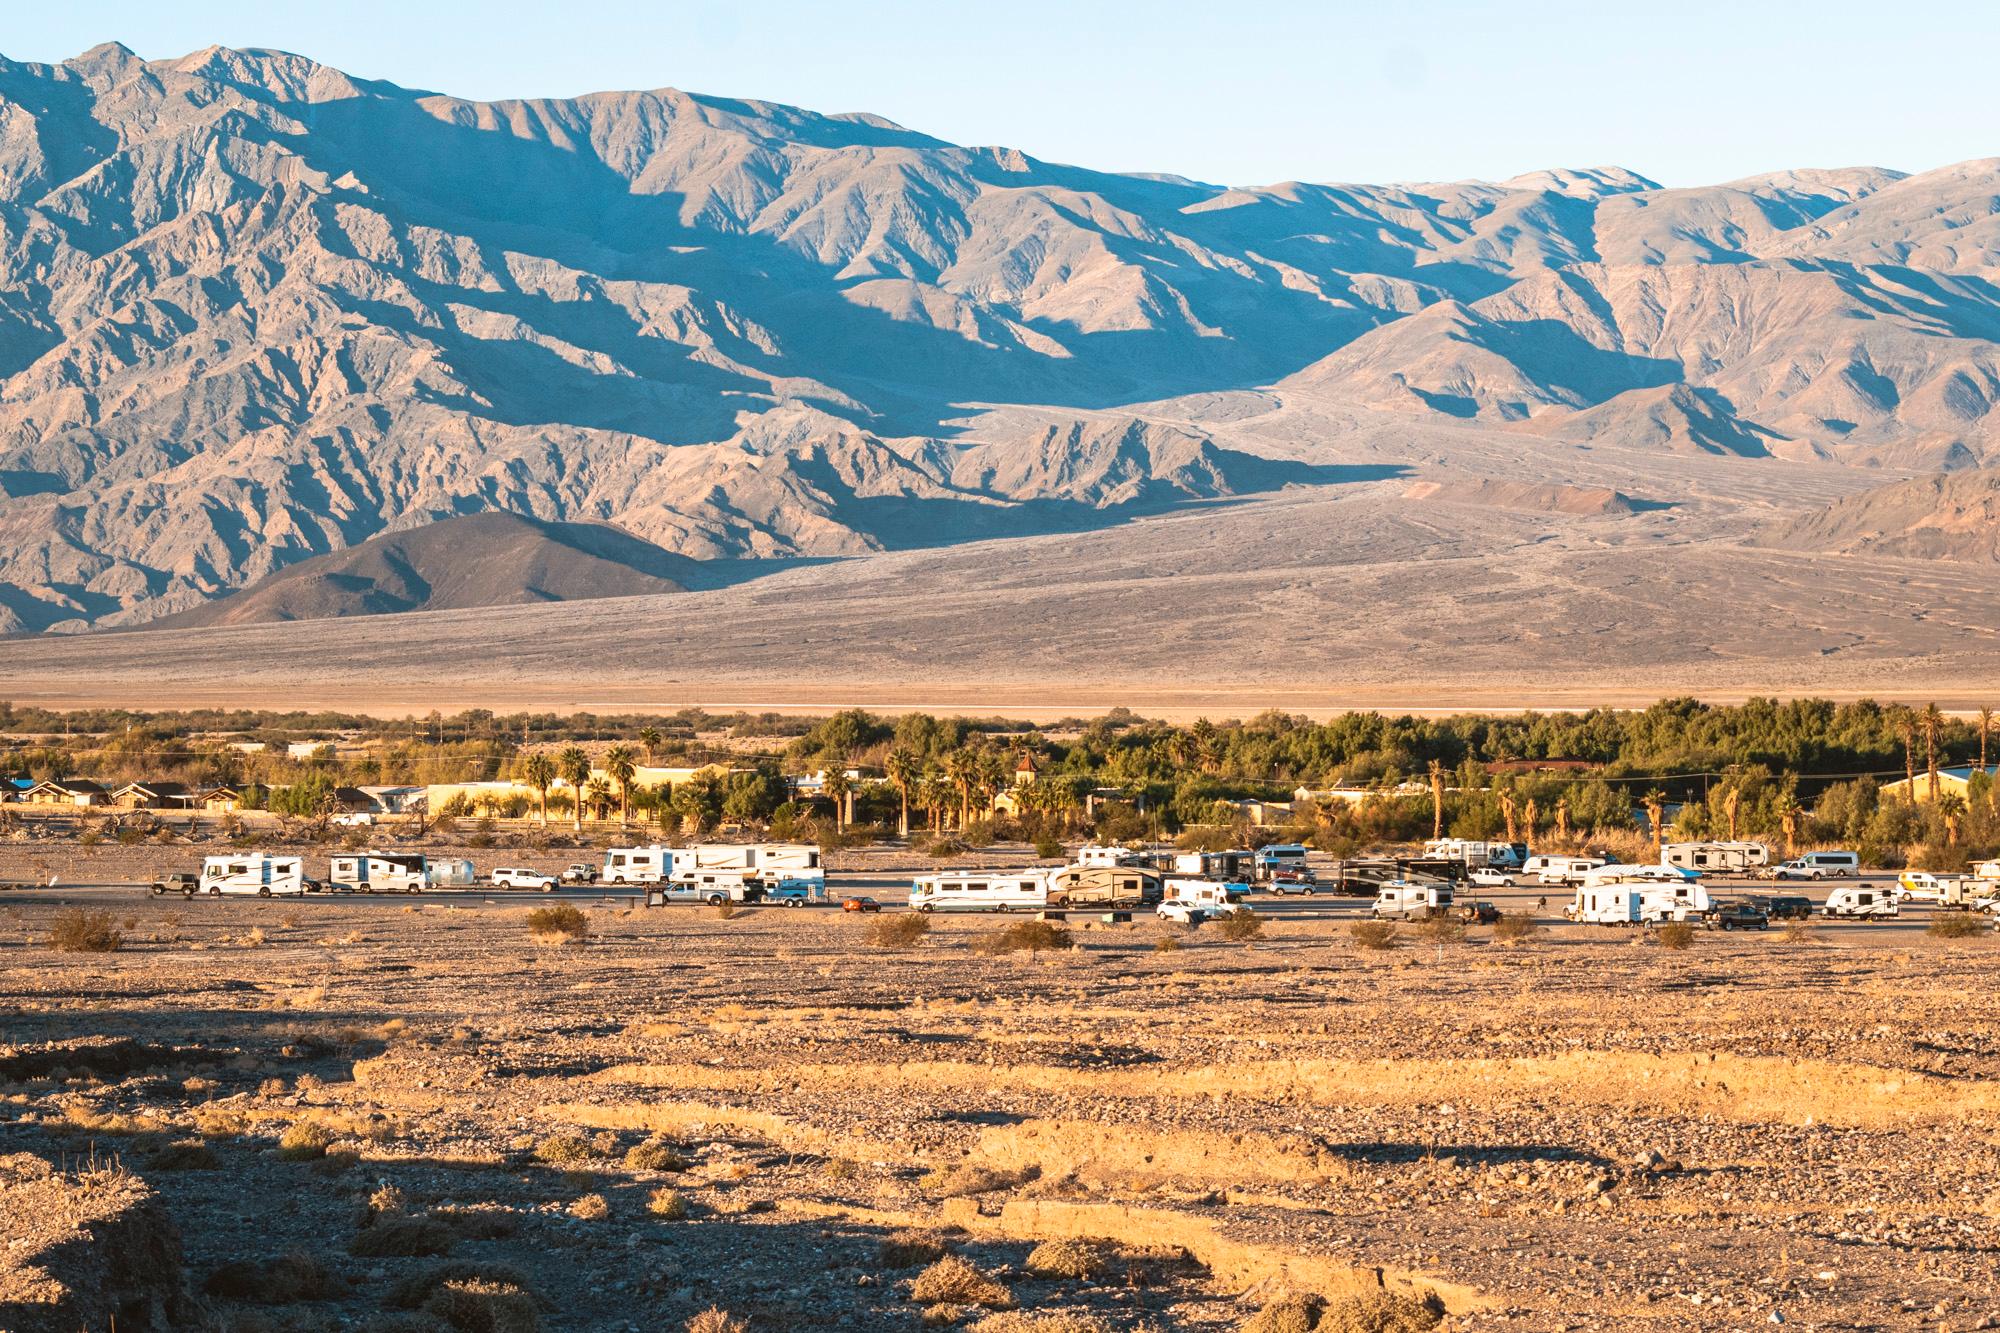 a long distance view of RVs and trailers in a gravel area with distant mountains